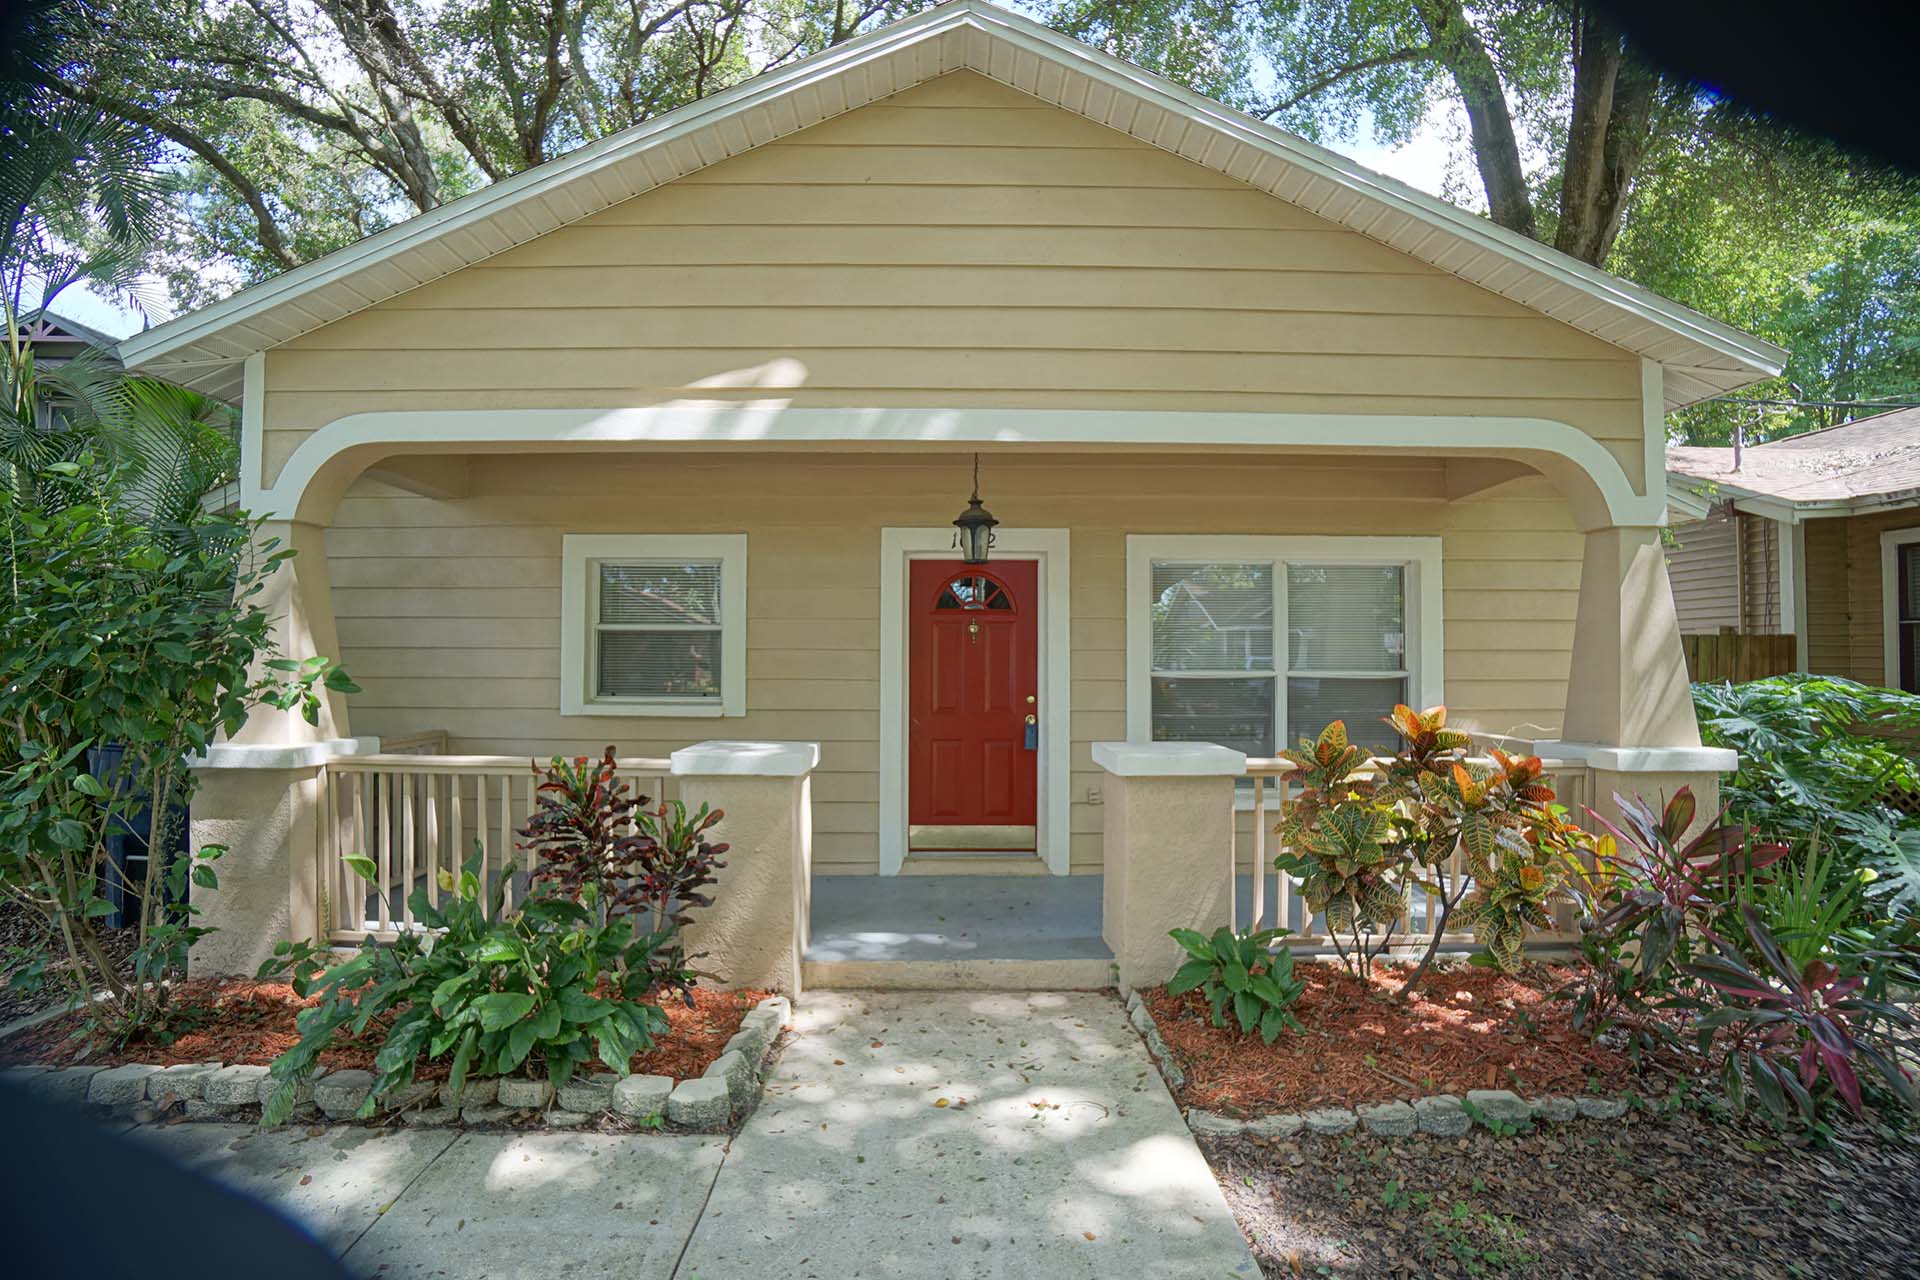 A beige house with a red door near where Hoffman Realty offers Tampa real estate services